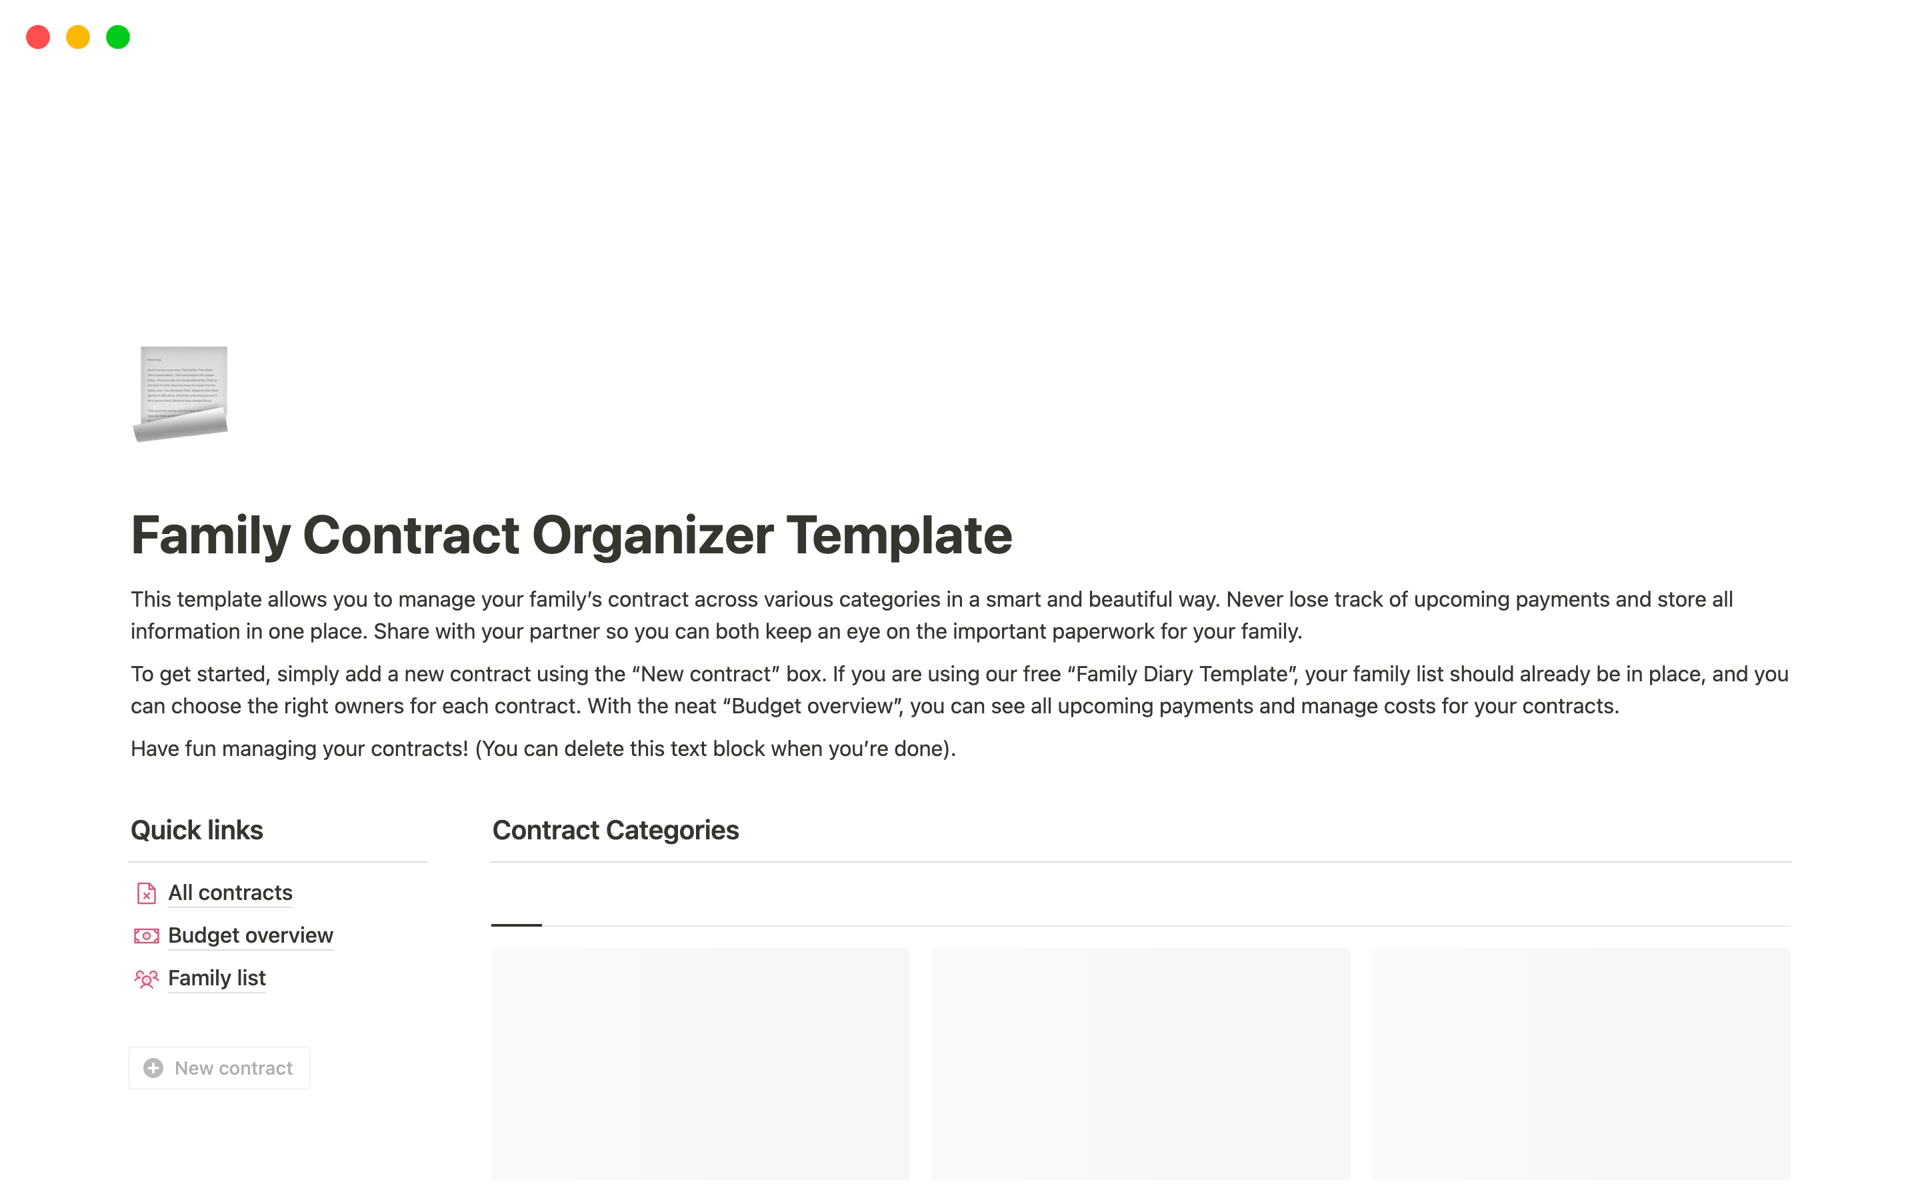 This template allows you to manage your family’s contract across various categories in a smart and beautiful way.